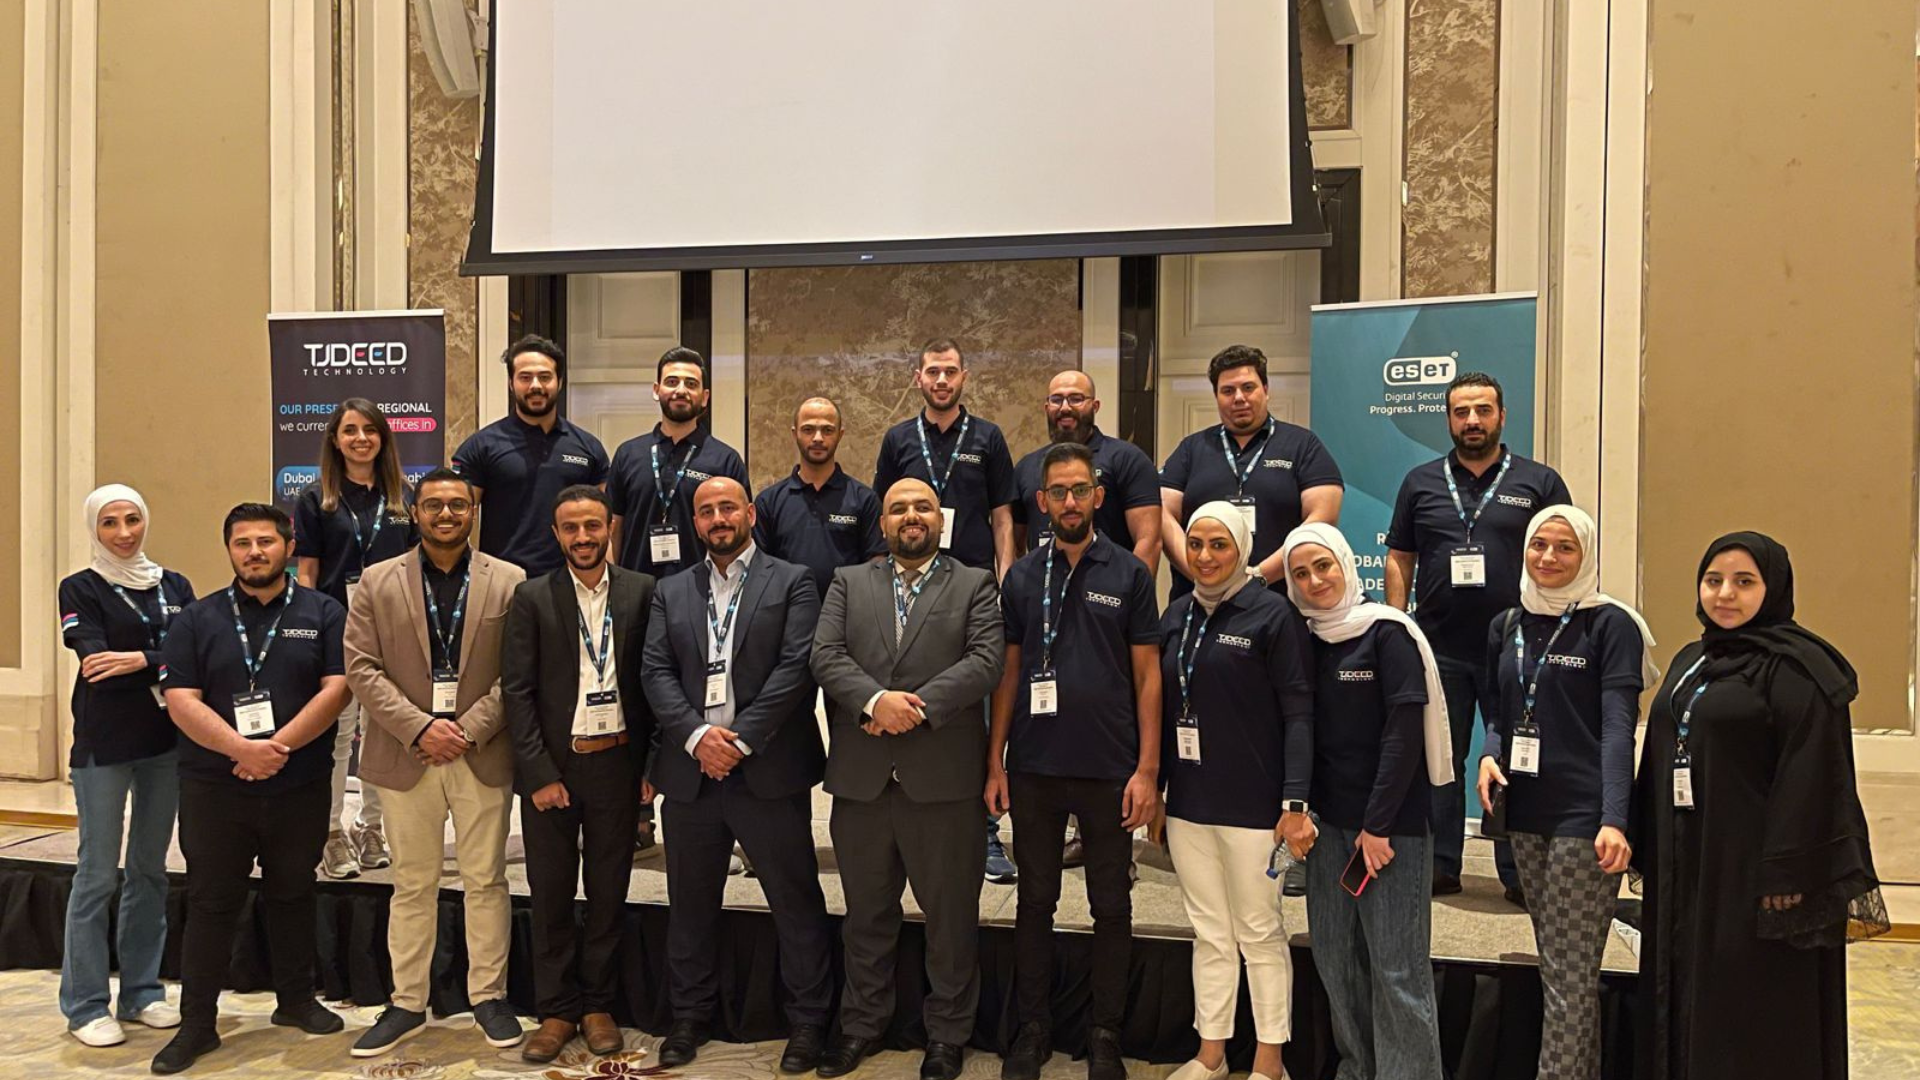 TJDEED and ESET Join Forces to Conduct Cybersecurity Seminar in Amman